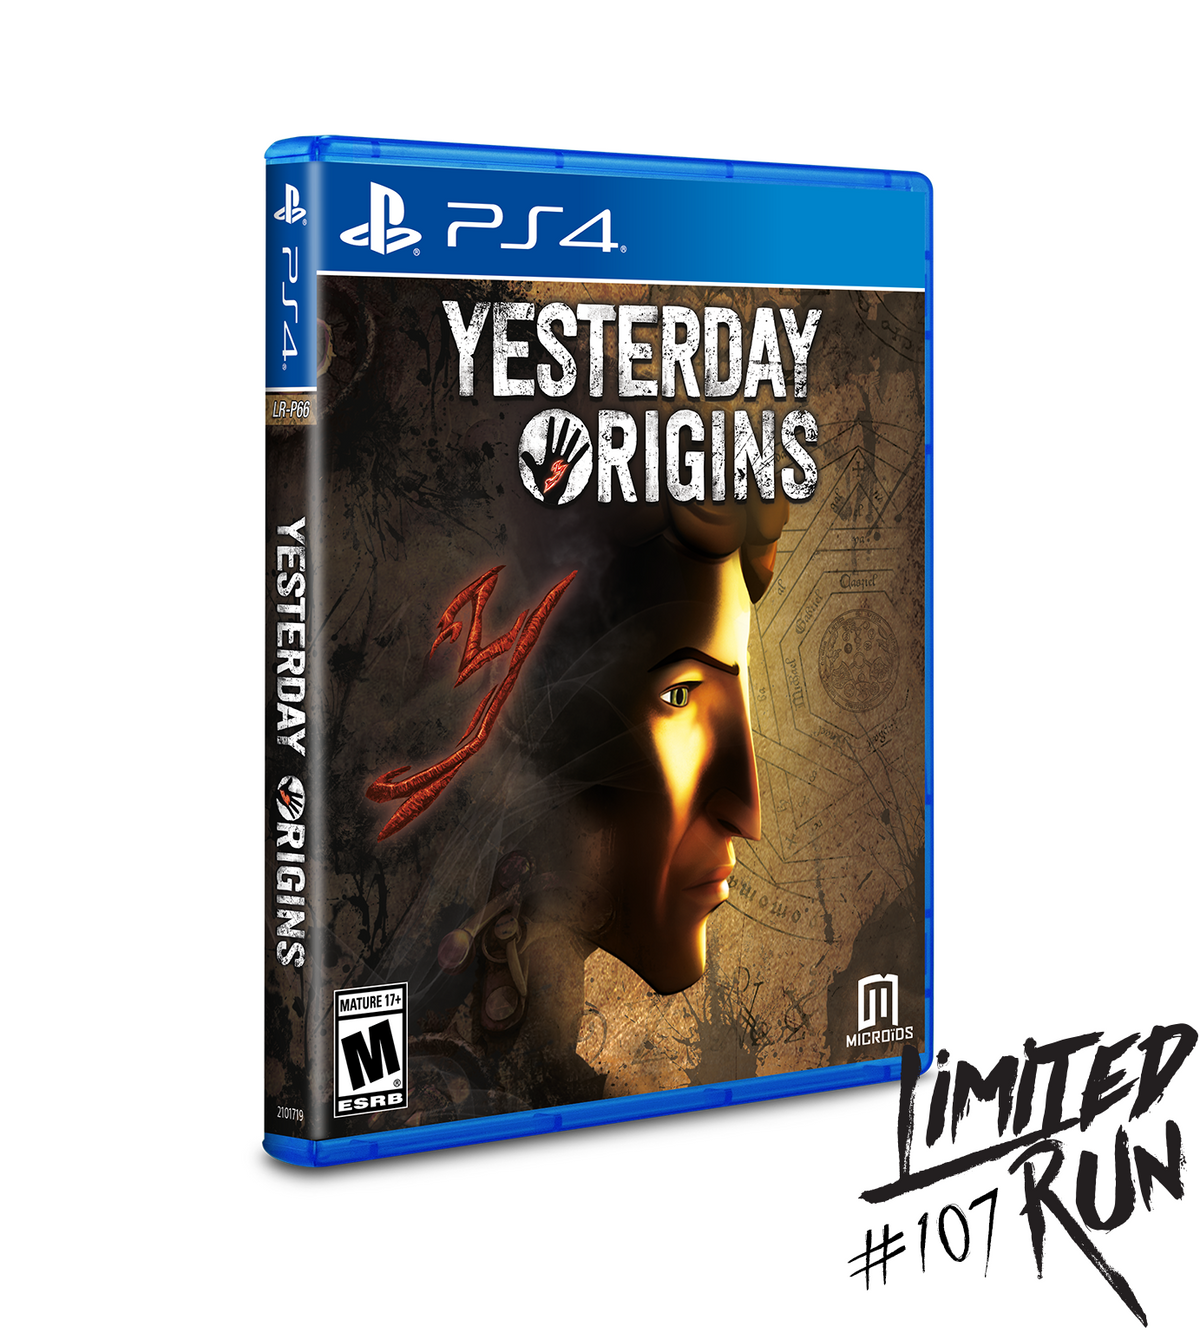 Limited Run #107: Yesterday Origins (PS4)